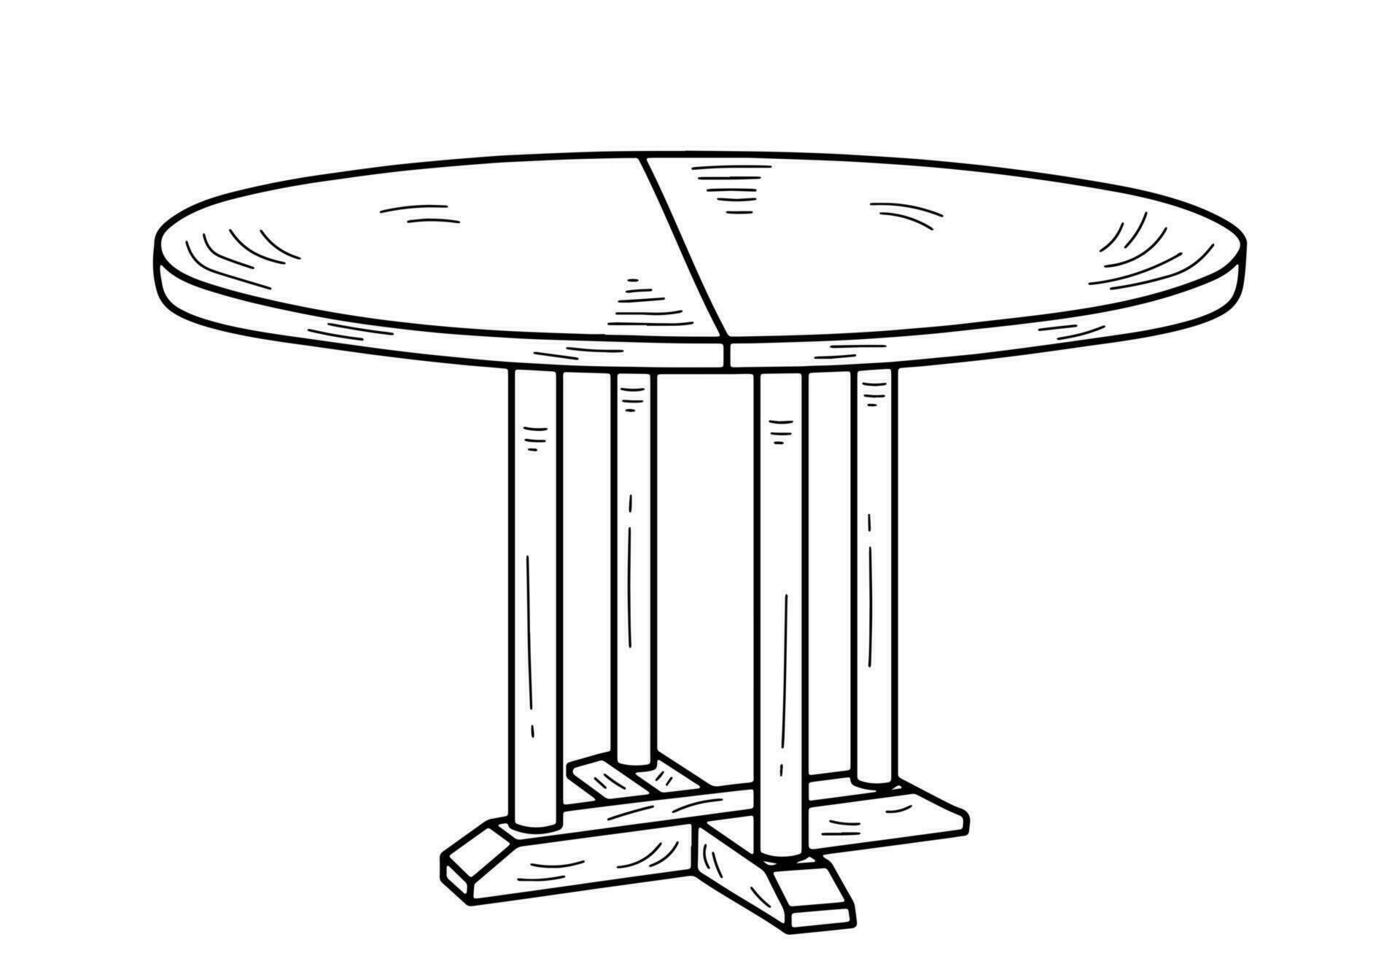 Sketch of a four post extendable table. Desk, diet table, desktop, kitchen table. Piece of furniture vector